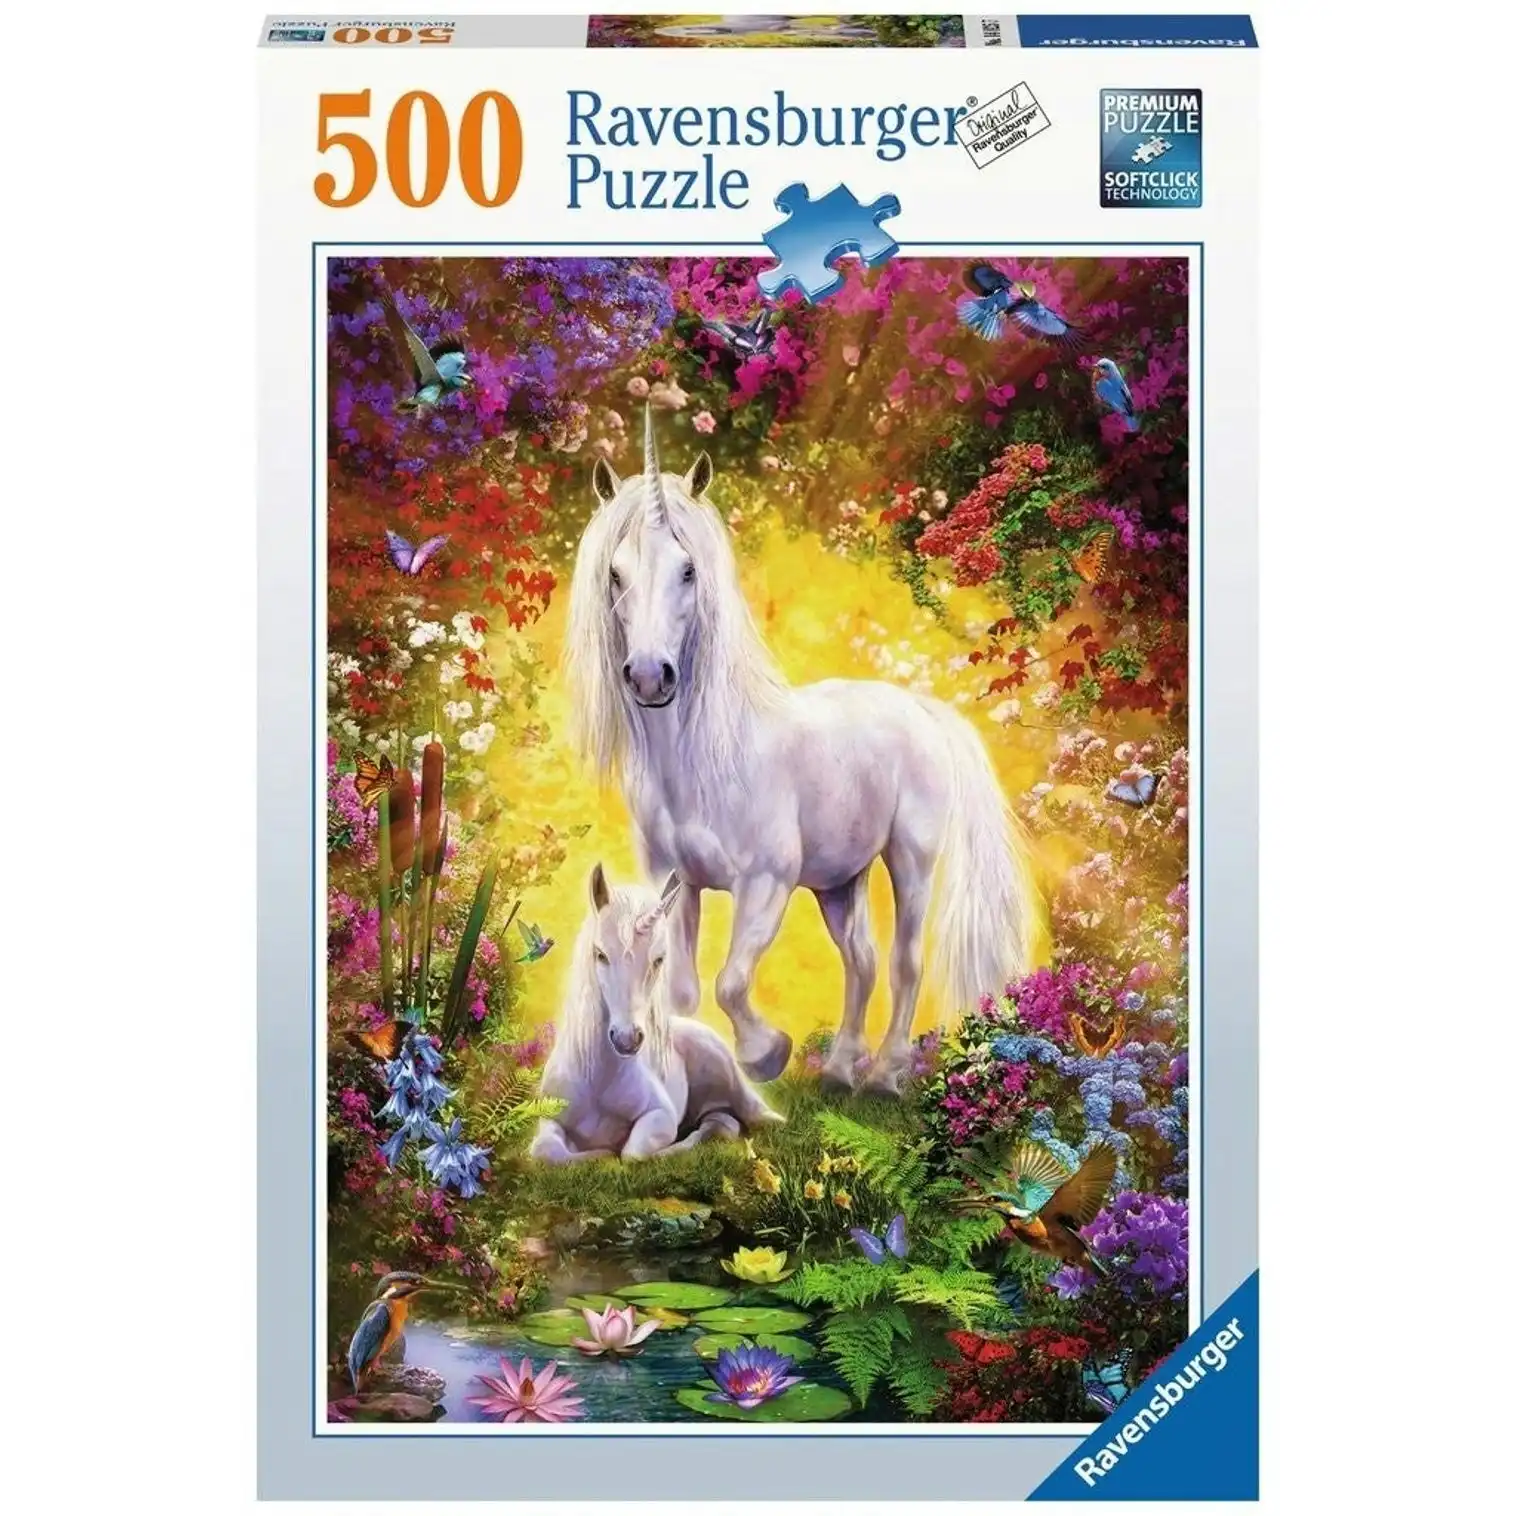 Ravensburger - Unicorn And Foal Puzzle 500 Pieces Jigsaw Puzzle